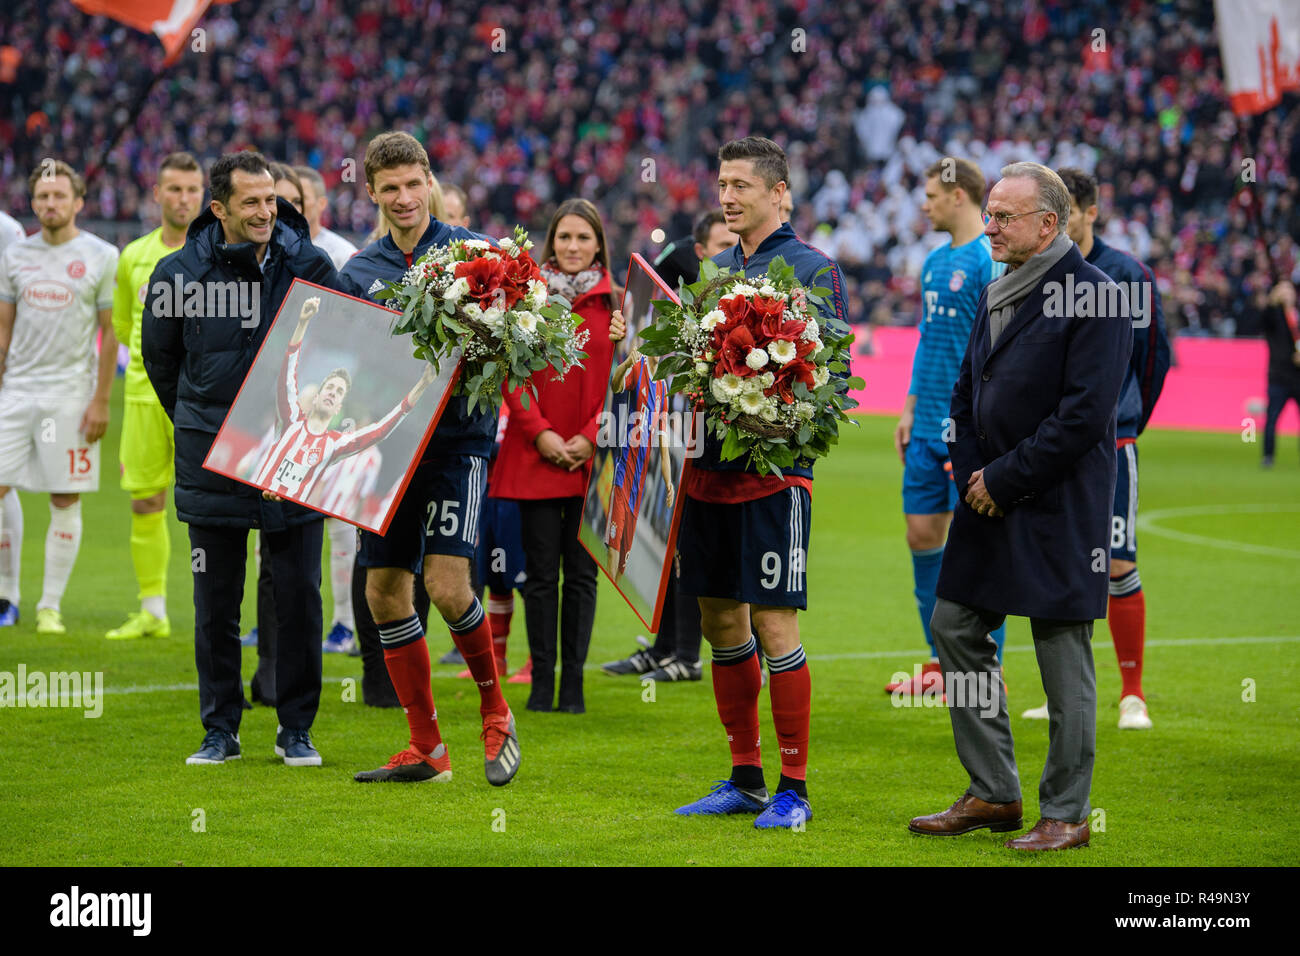 24 November 2018, Bavaria, Munich: Soccer: Bundesliga, Bayern Munich - Fortuna Dusseldorf, 12th matchday in the Allianz Arena. Thomas Muller from Bayern Munich (2nd from left) and Robert Lewandowski from Bayern Munich (2nd from right) are honored for their admission to the 100 Club. On the left is Hasan Salihamidzic, Sports Director of FC Bayern, and Karl-Heinz Rummenigge, CEO of FC Bayern. Photo: Matthias Balk/dpa - IMPORTANT NOTE: In accordance with the requirements of the DFL German Football League or the DFB German Football Association, it is used in the stadium and/or the match in the Stock Photo